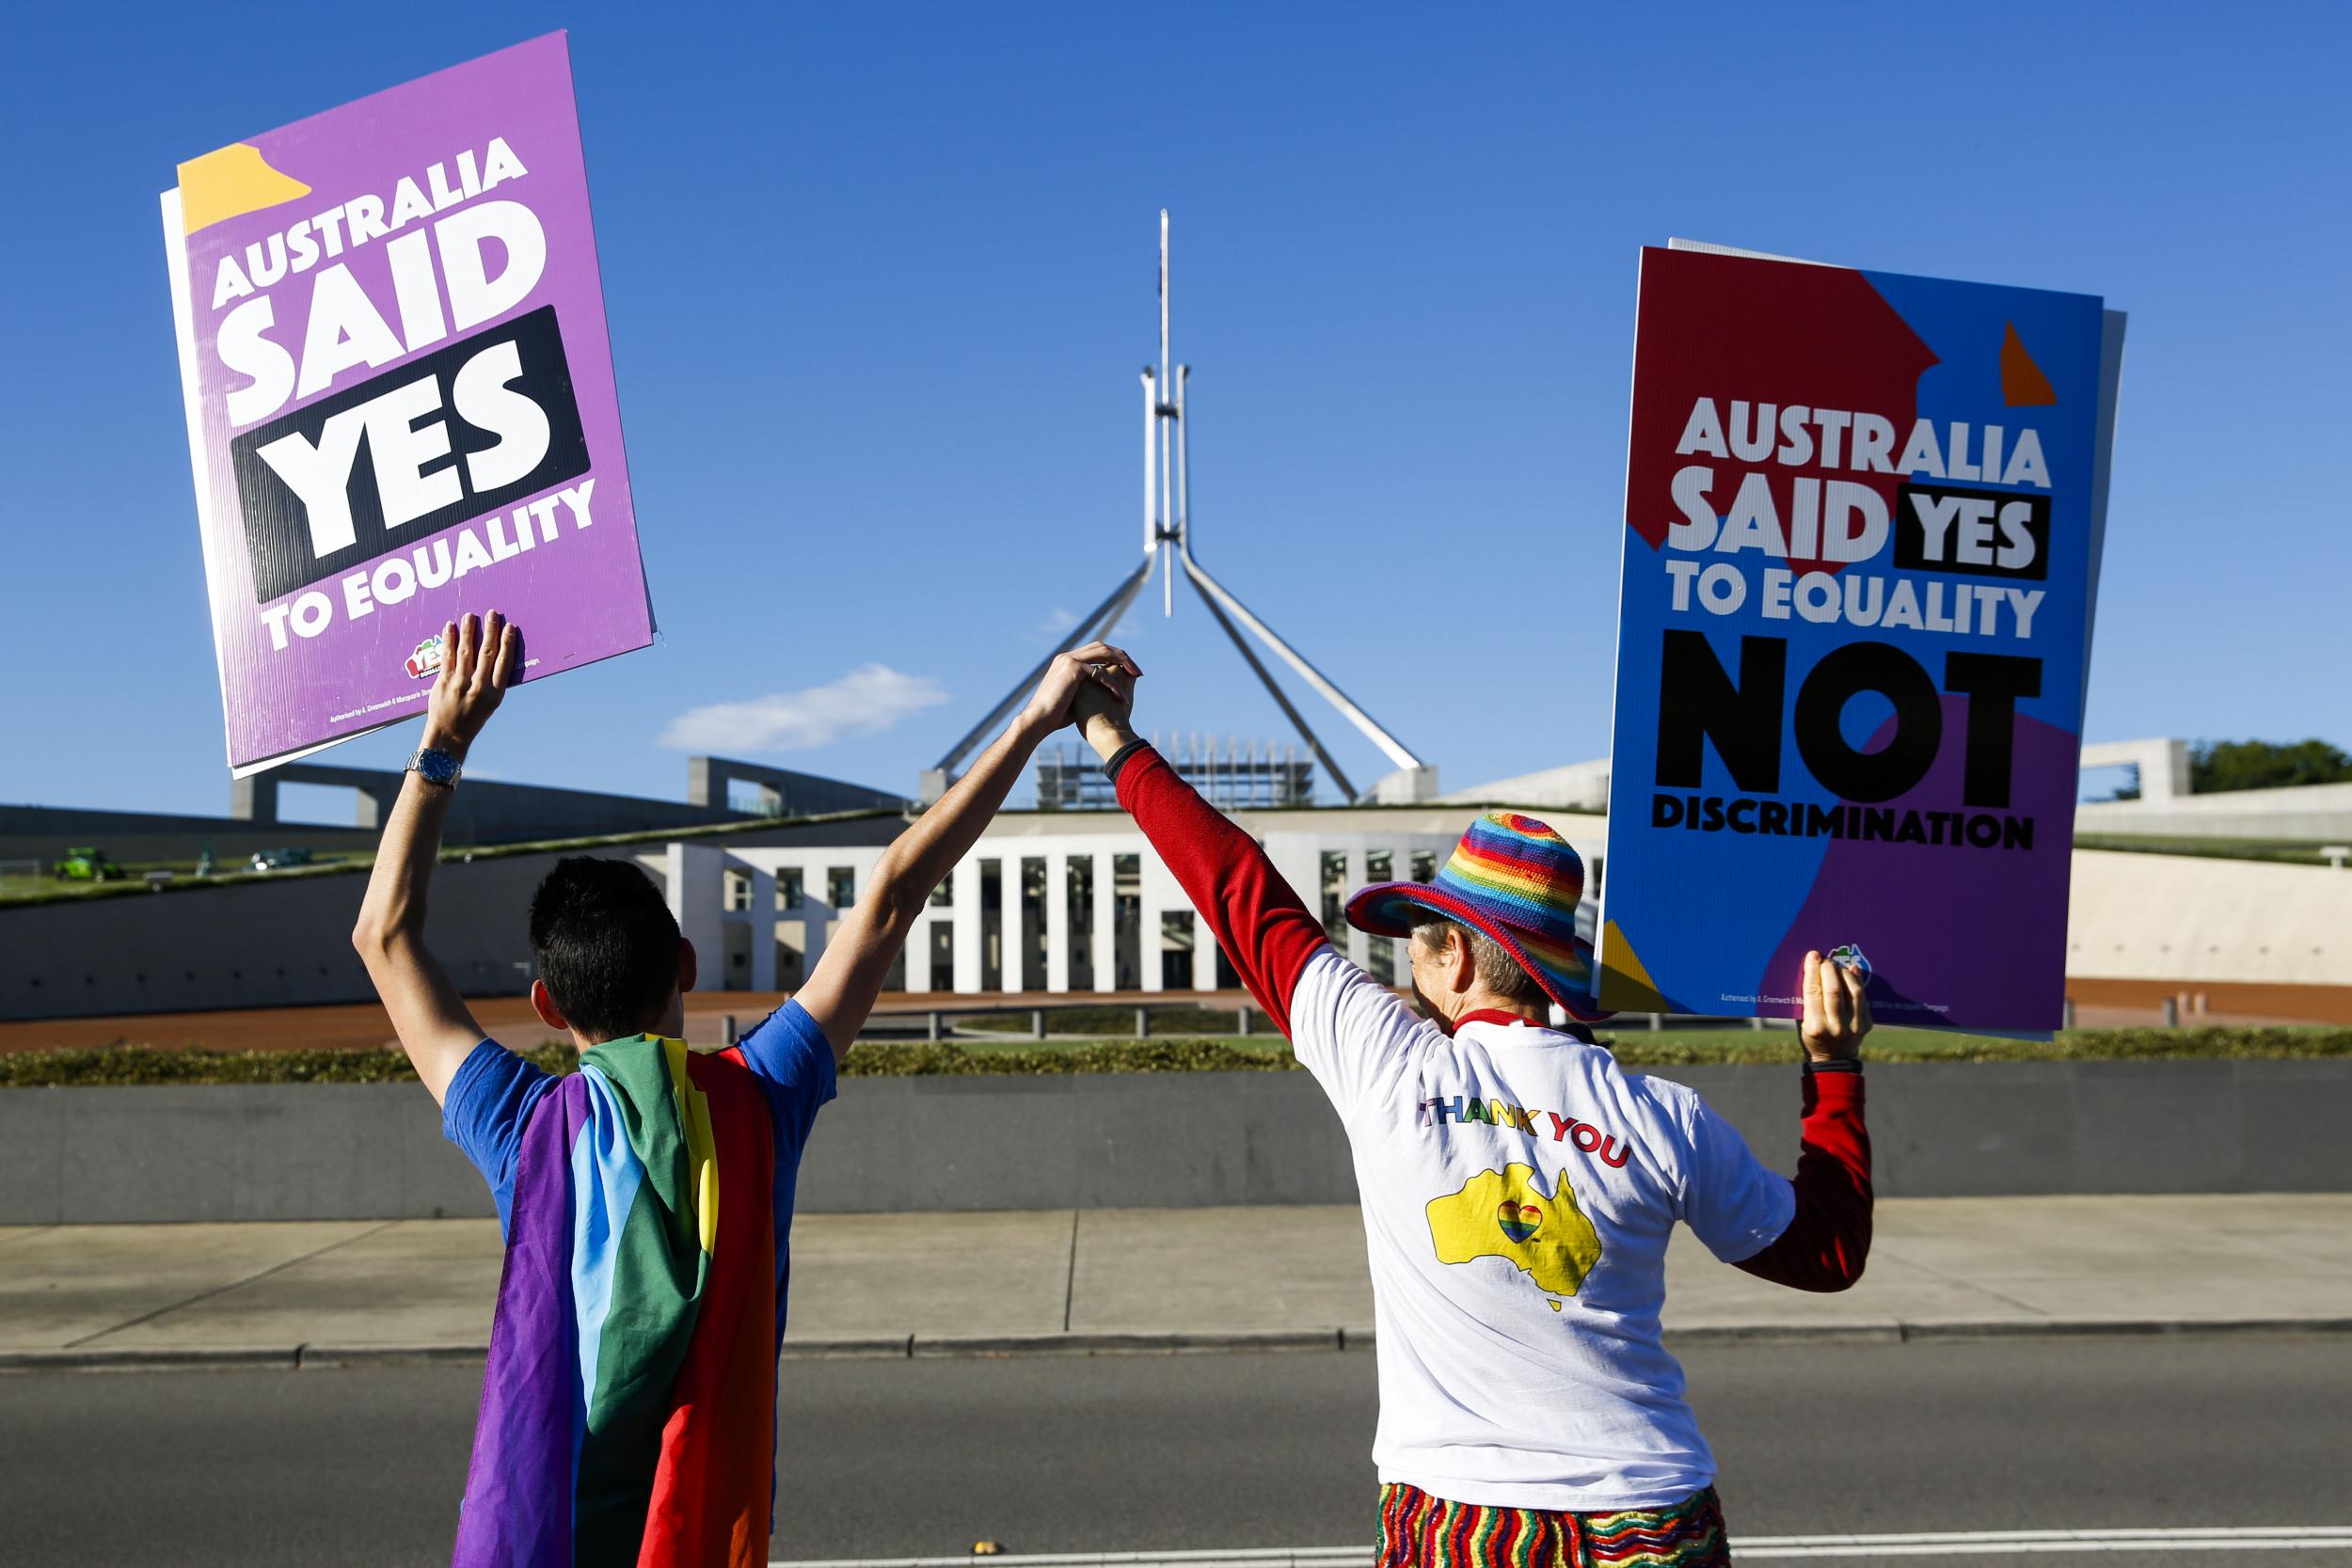 Campaigners in front of Australia's Parliament House in Canberra ahead of the vote on same-sex marriage